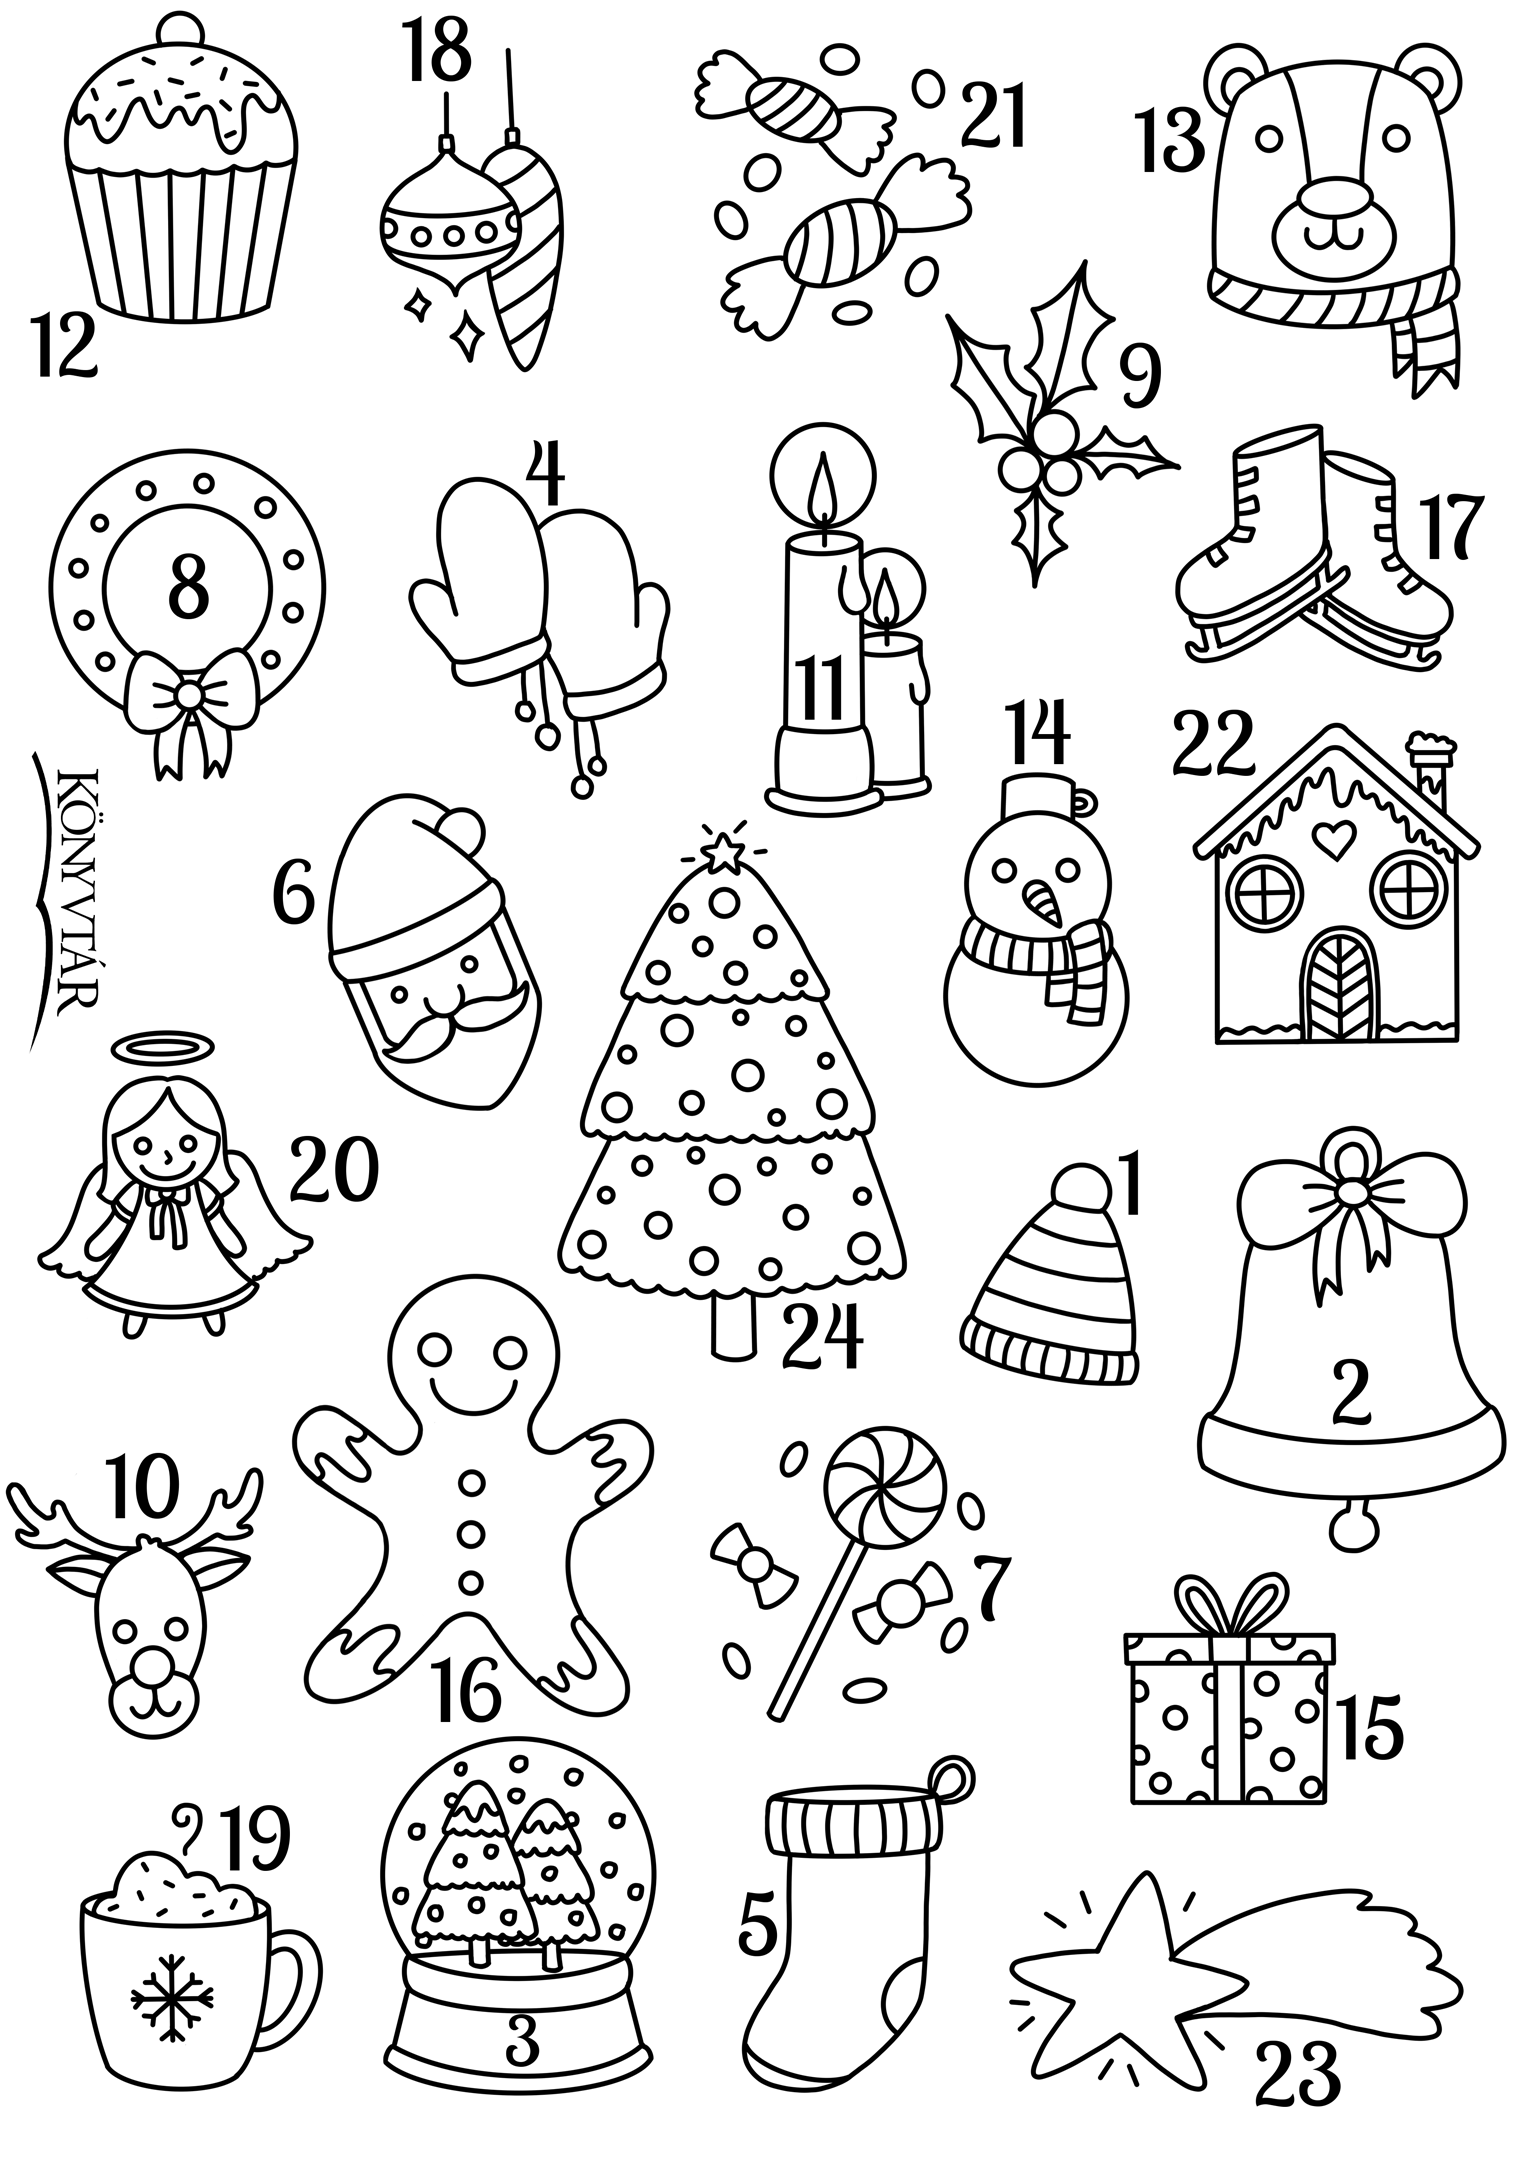 Christmas advent calendar colouring page by wildgica on